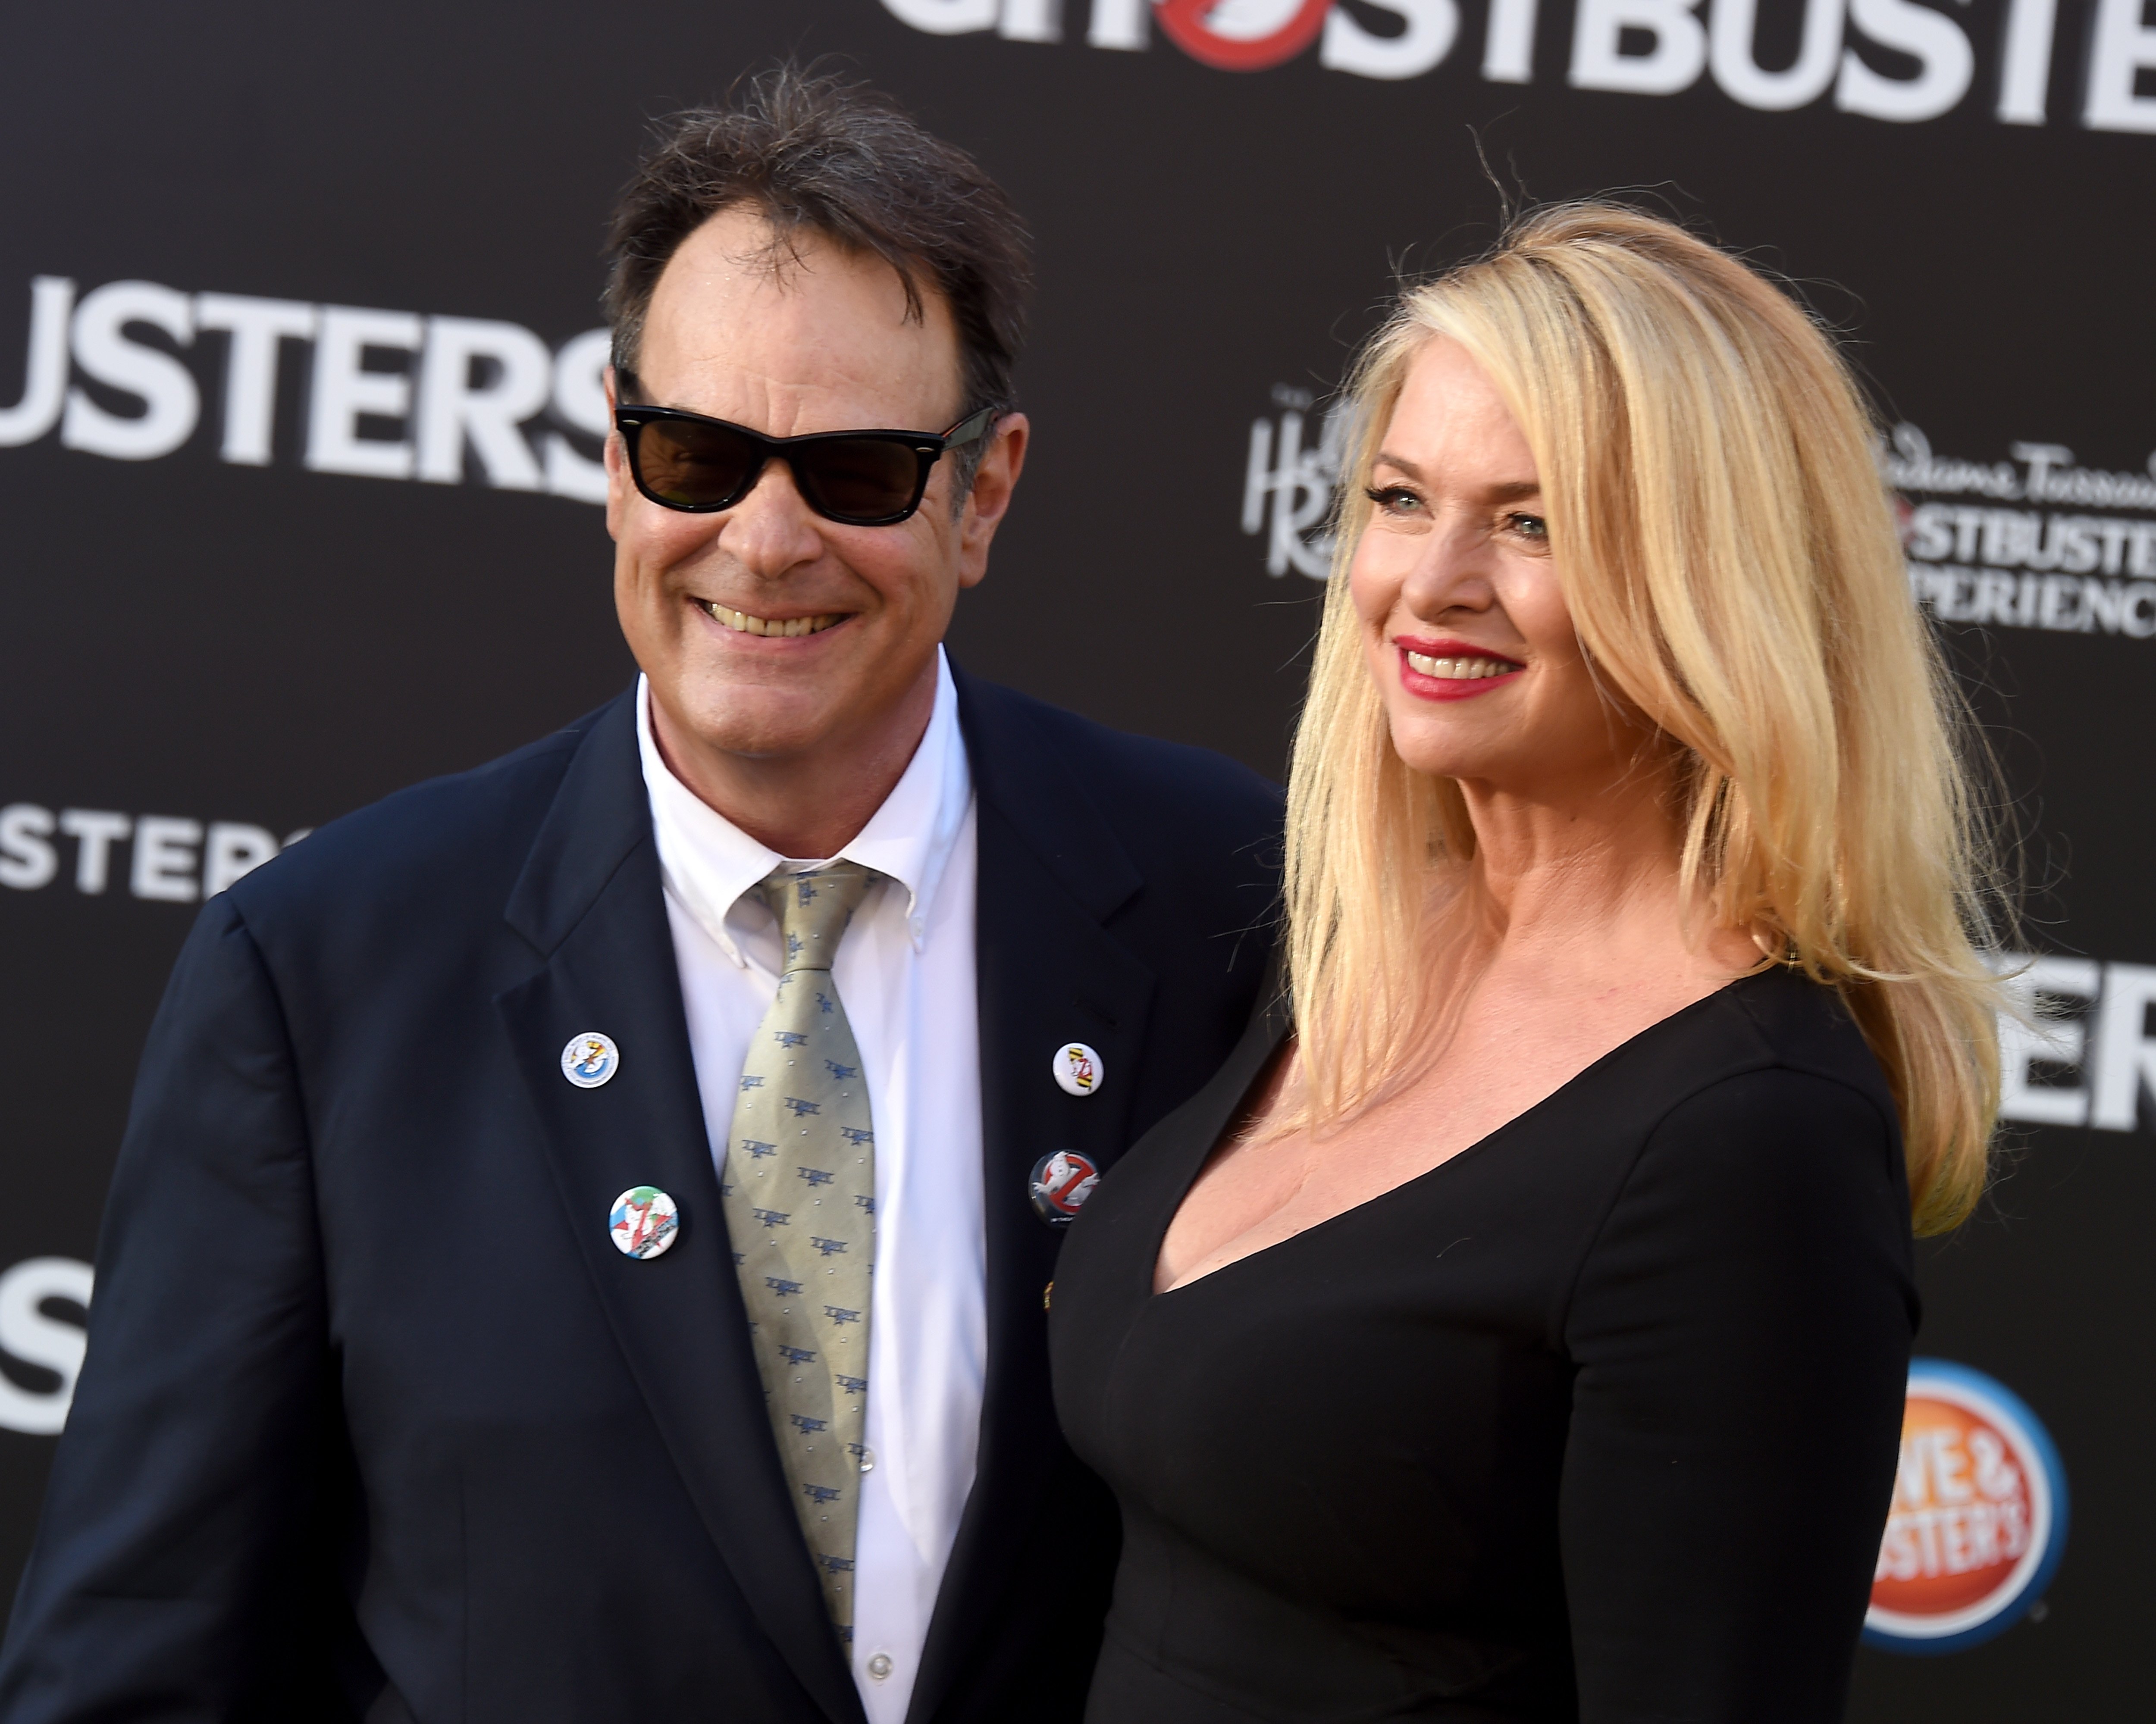 Actors Dan Aykroyd and Donna Dixon arrive at the premiere of Sony Pictures' "Ghostbusters" at TCL Chinese Theatre on July 9, 2016 in Hollywood, California. | Source: Getty Images